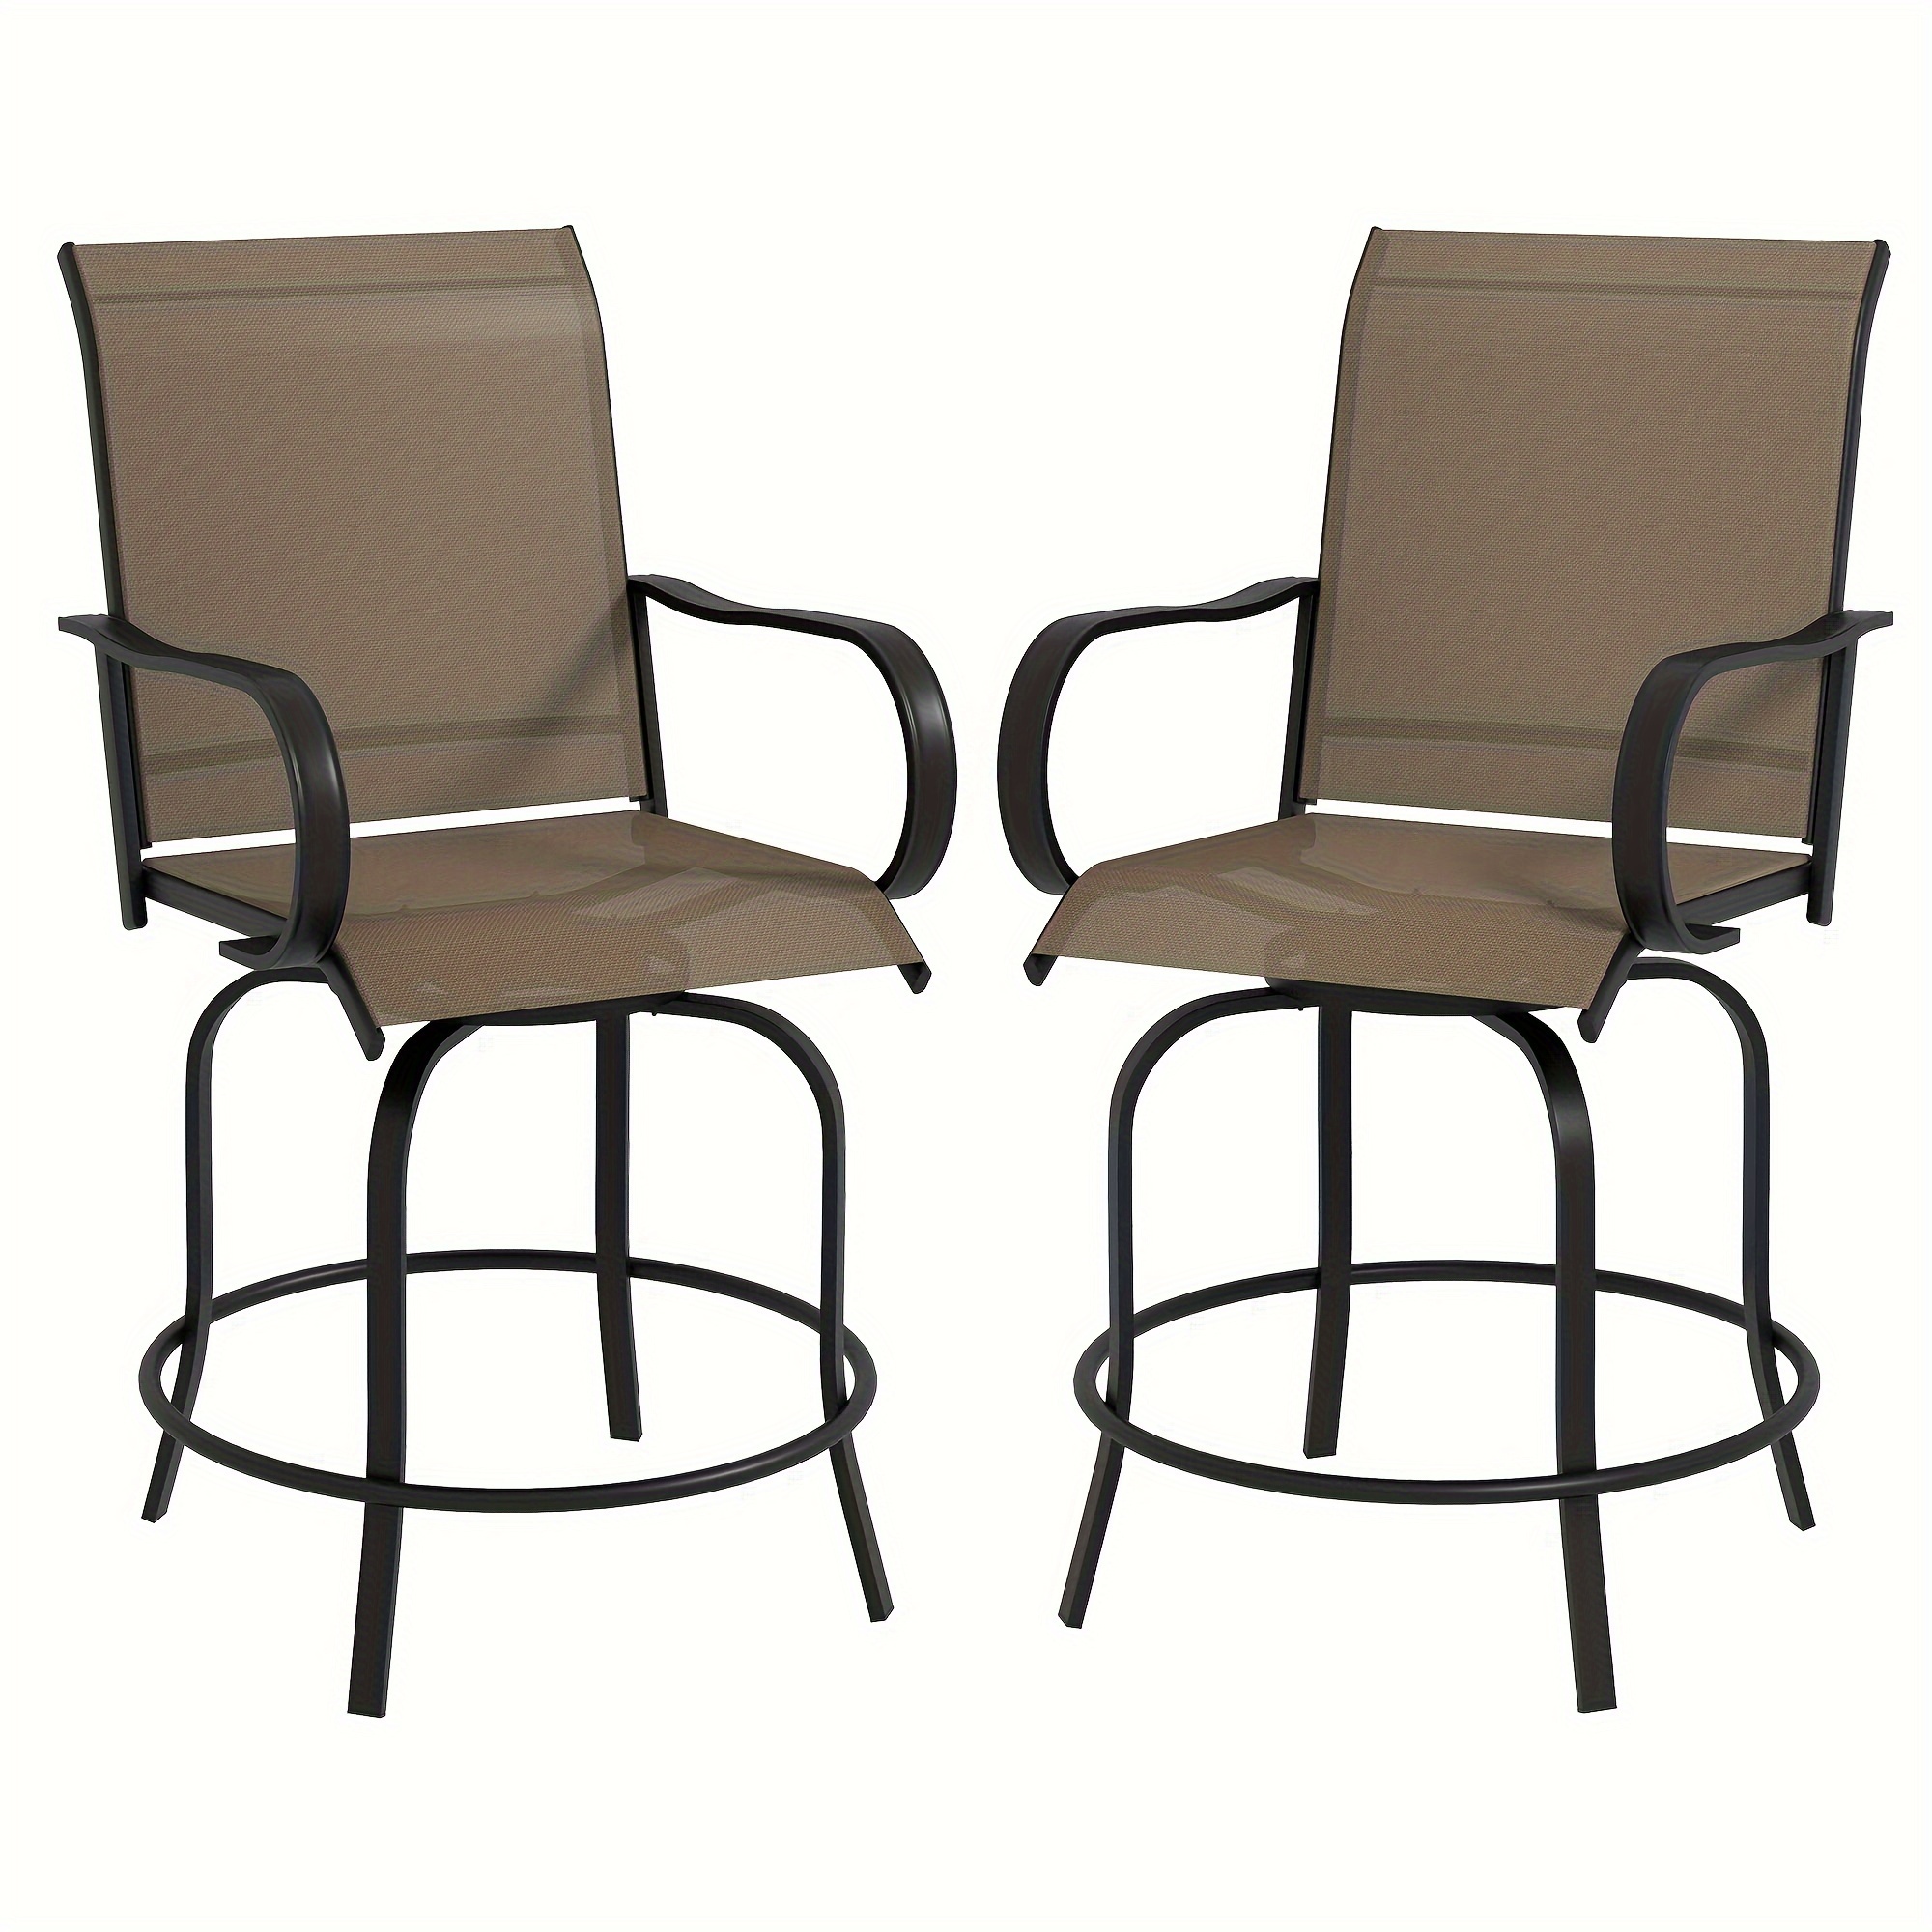 

Outsunny Outdoor Bar Stools With Armrests, Set Of 2 360° Swivel Bar Height Patio Chairs With High-density Mesh Fabric, Steel Frame Dining Chairs For Balcony, Poolside, Backyard, Brown